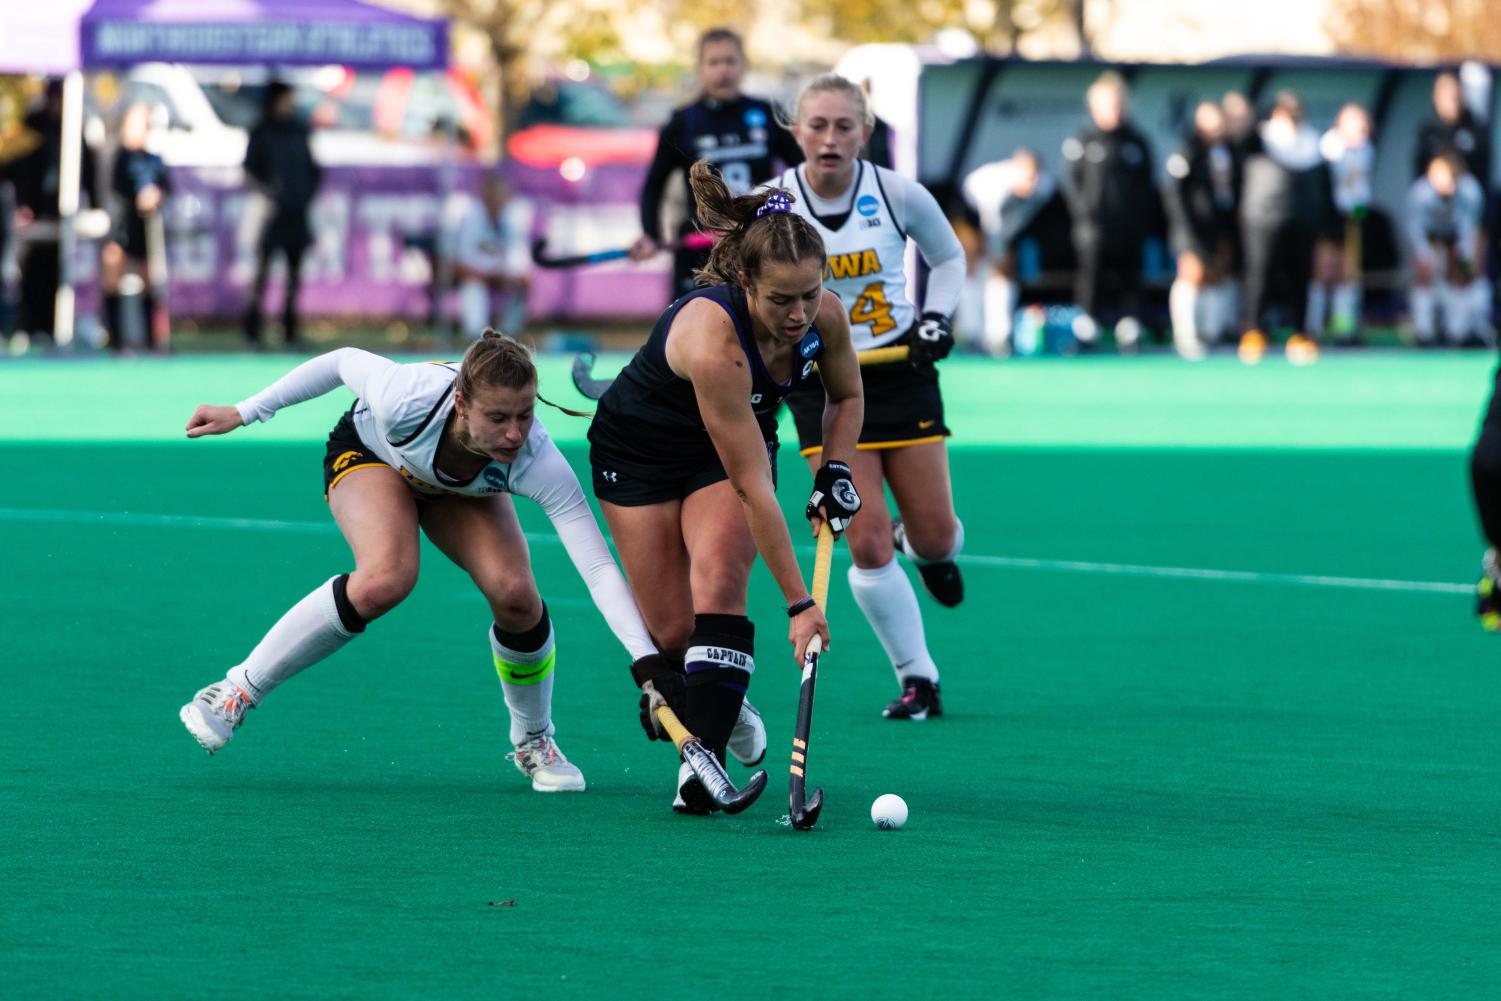 An athlete in a black jersey chases after a white ball with a field hockey stick as an athlete in white jersey uses a field hockey stick to reach for the ball.